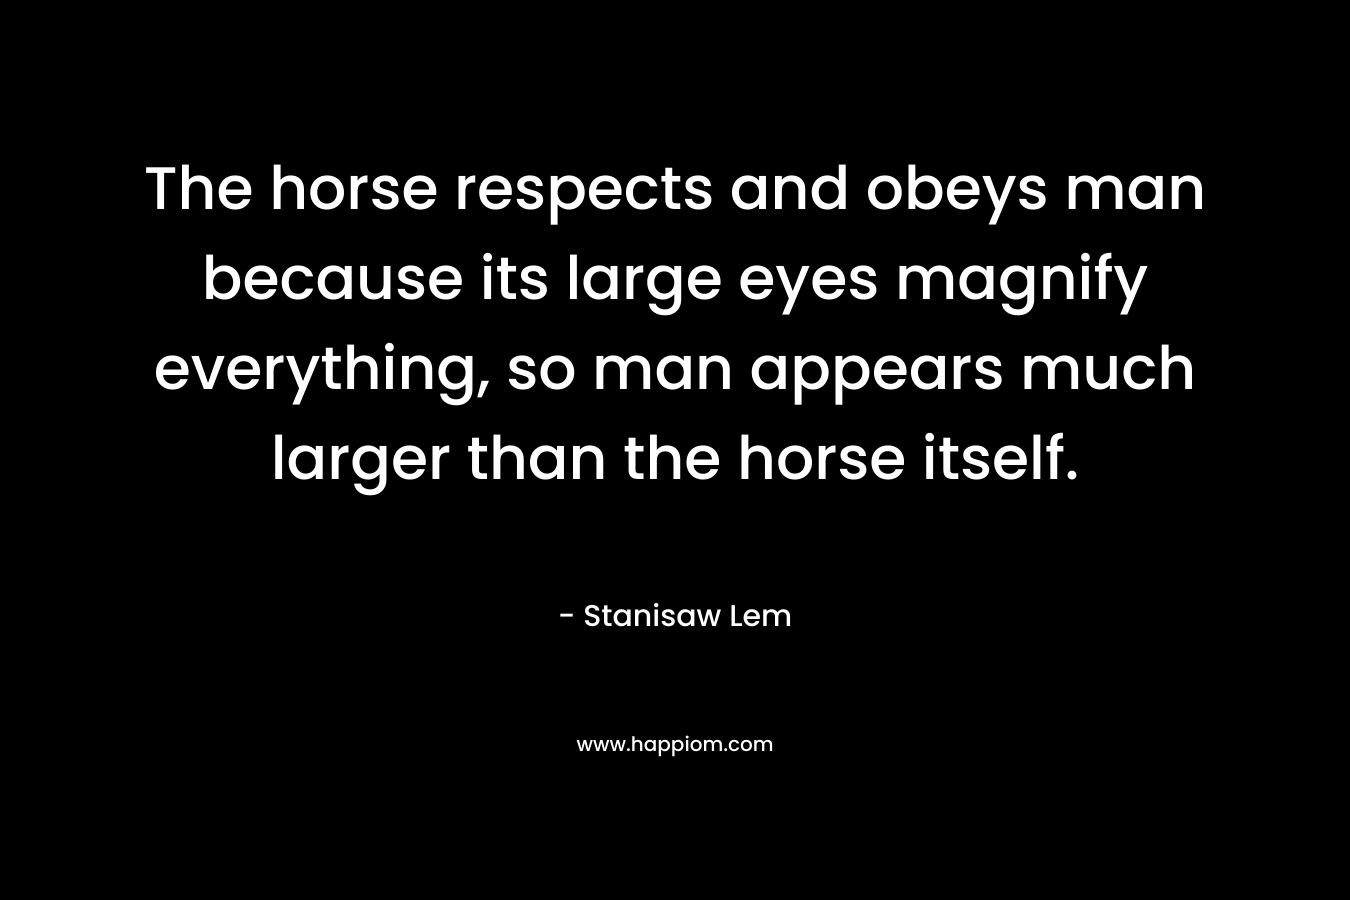 The horse respects and obeys man because its large eyes magnify everything, so man appears much larger than the horse itself. – Stanisaw Lem